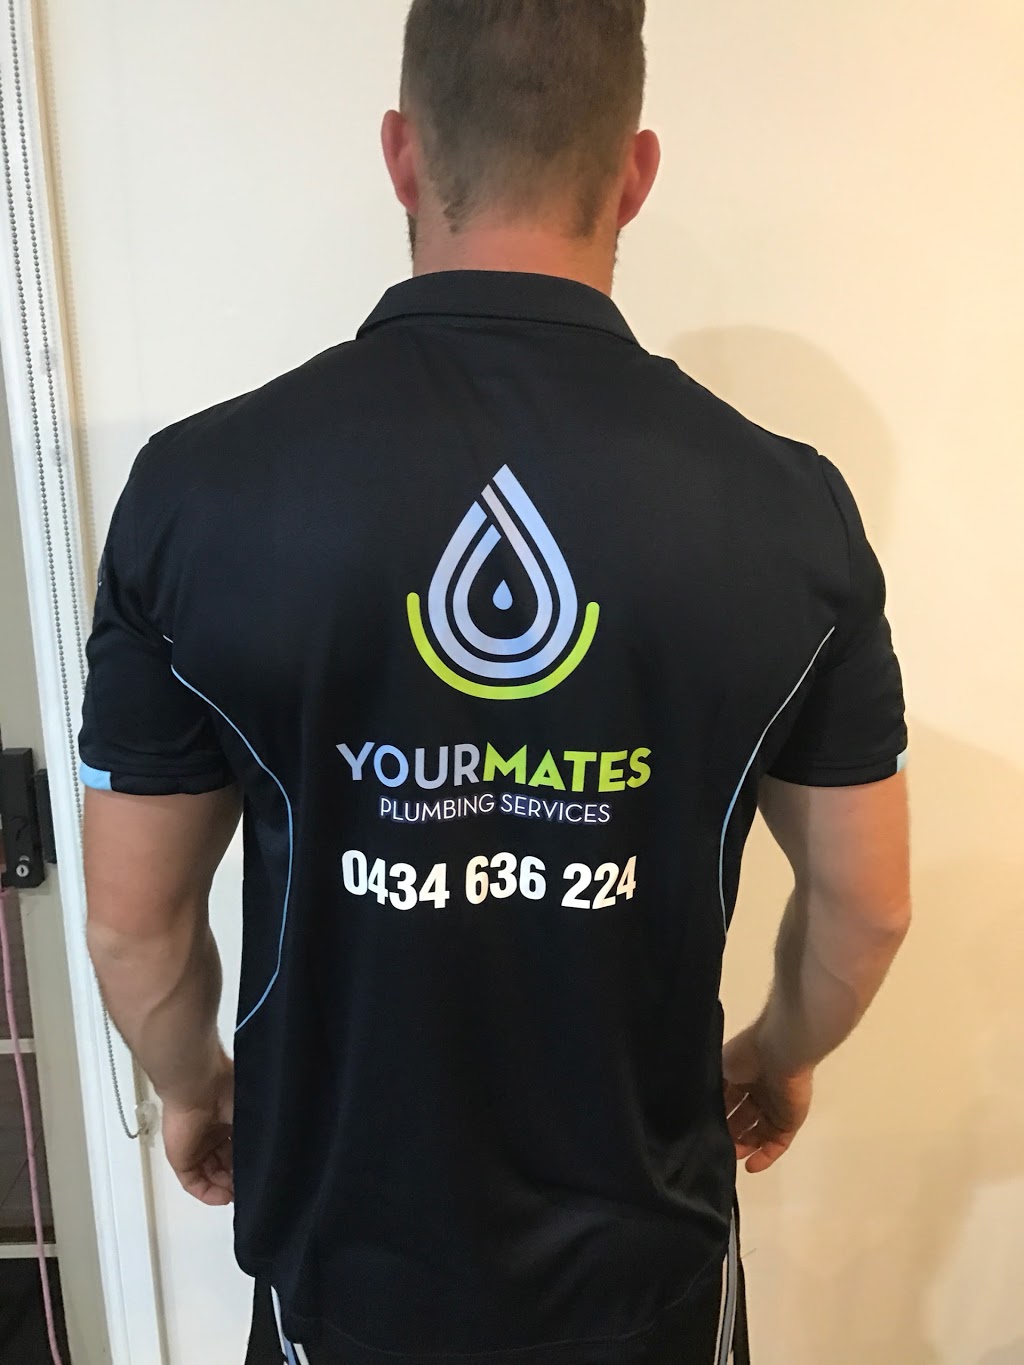 Your Mates Plumbing | plumber | The Entrance NSW 2261, Australia | 0408482303 OR +61 408 482 303